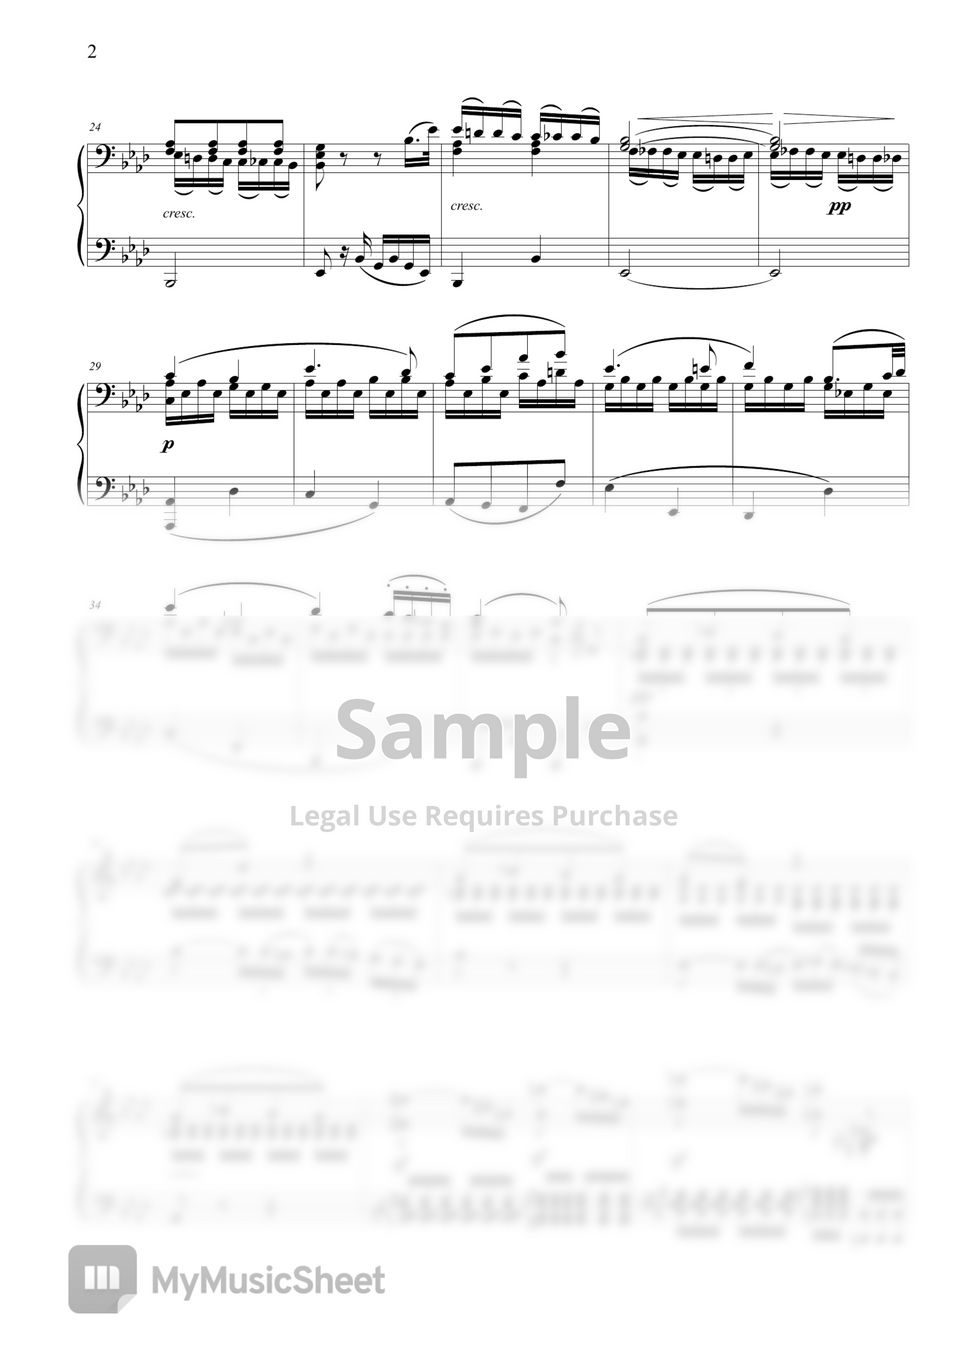 L.V.Beethoven - Pathetique Beethoven 2nd movement by MyMusicSheet Official